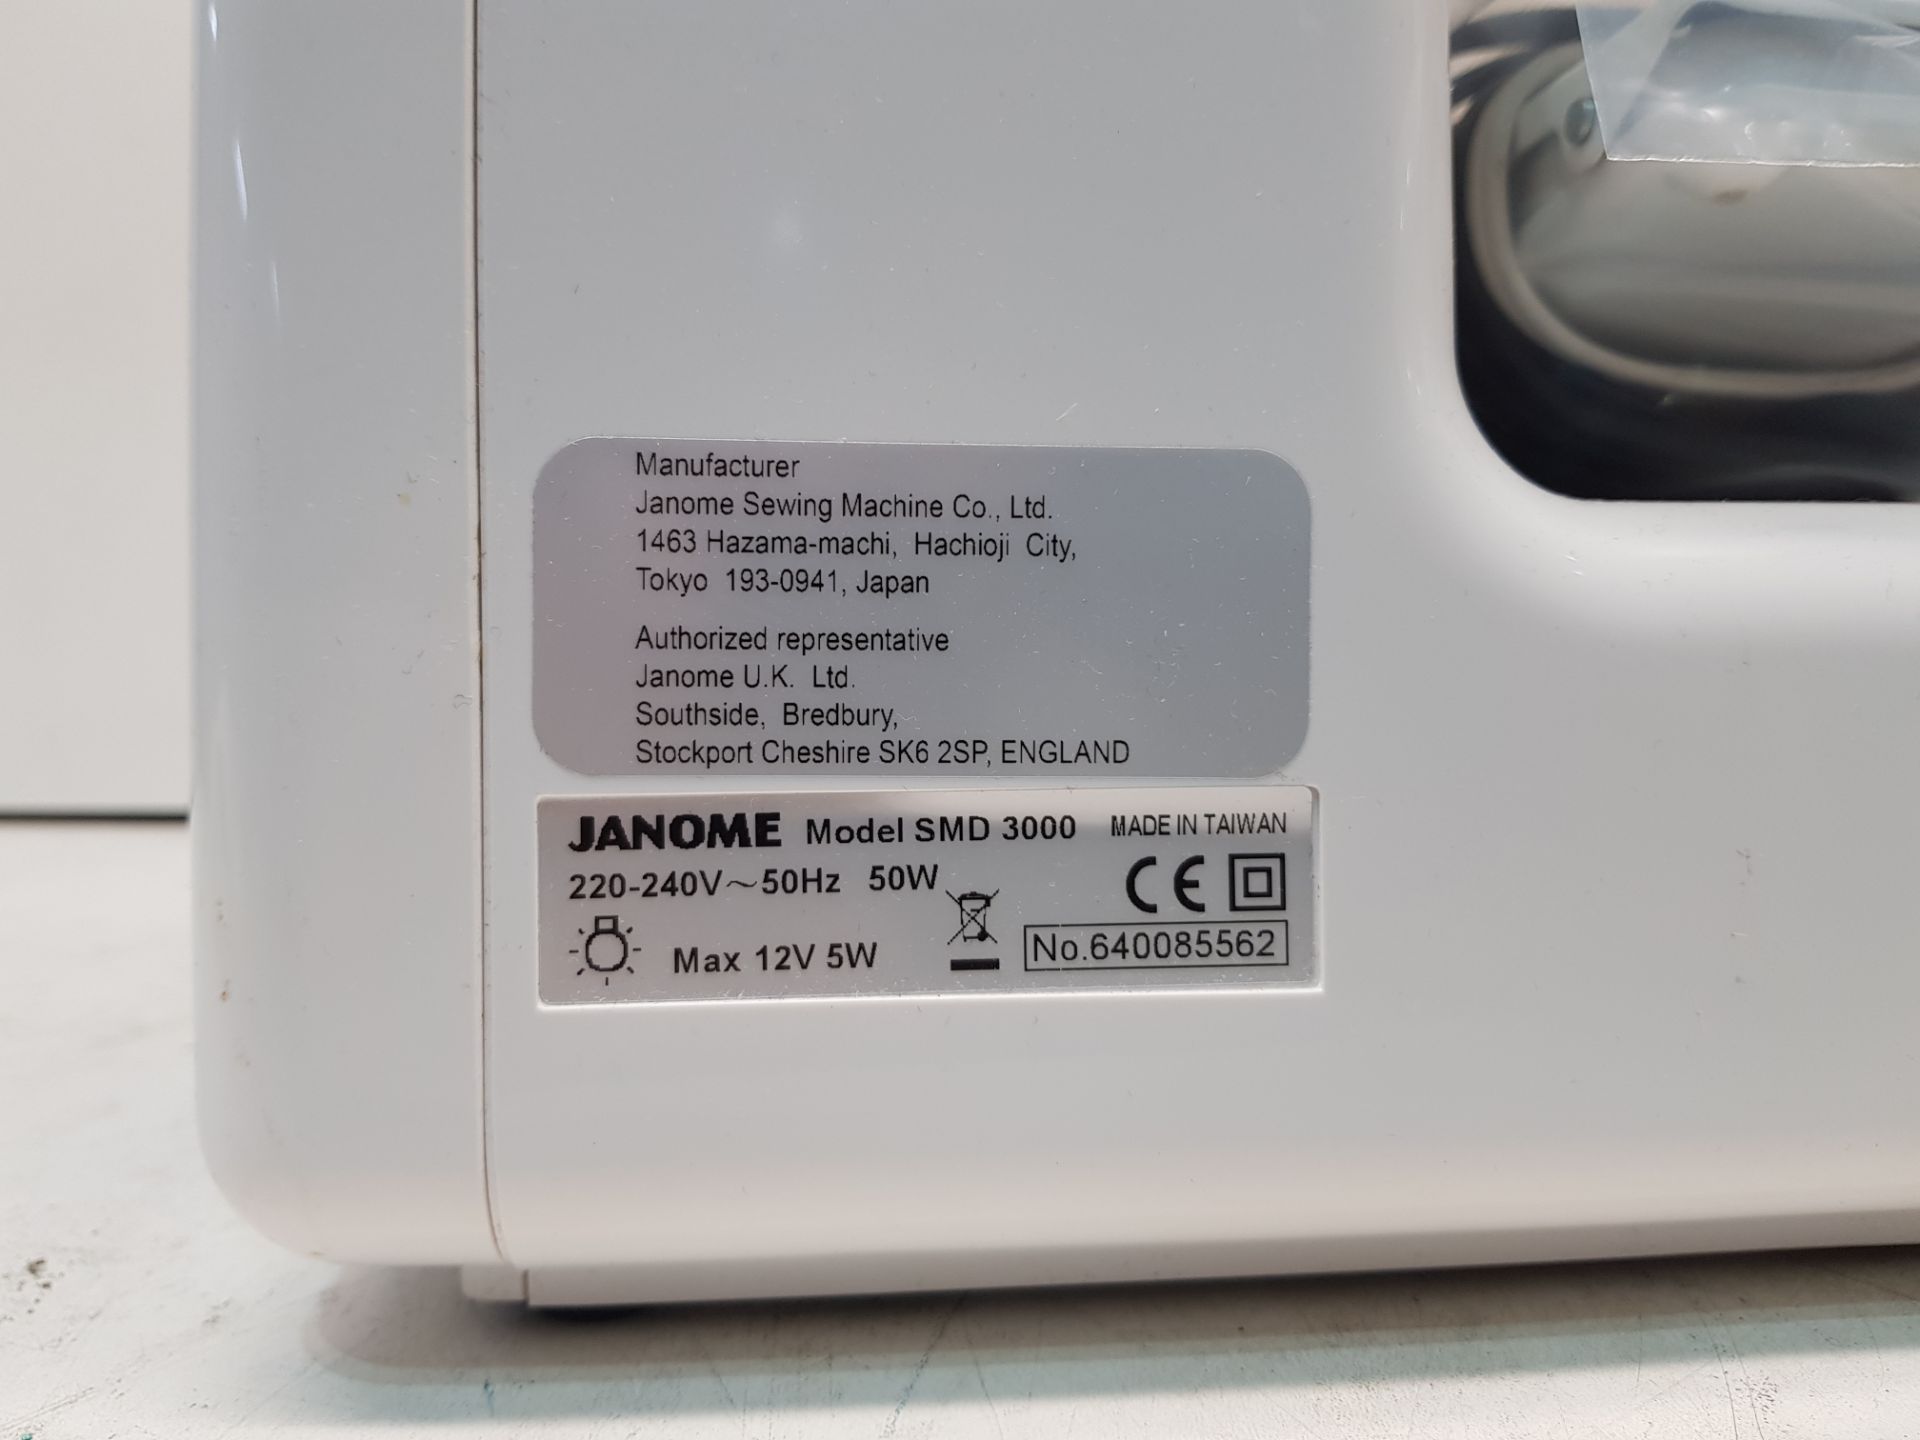 Janome SMD 3000 Sewing Machine S/N: 640085562 - Image 3 of 4